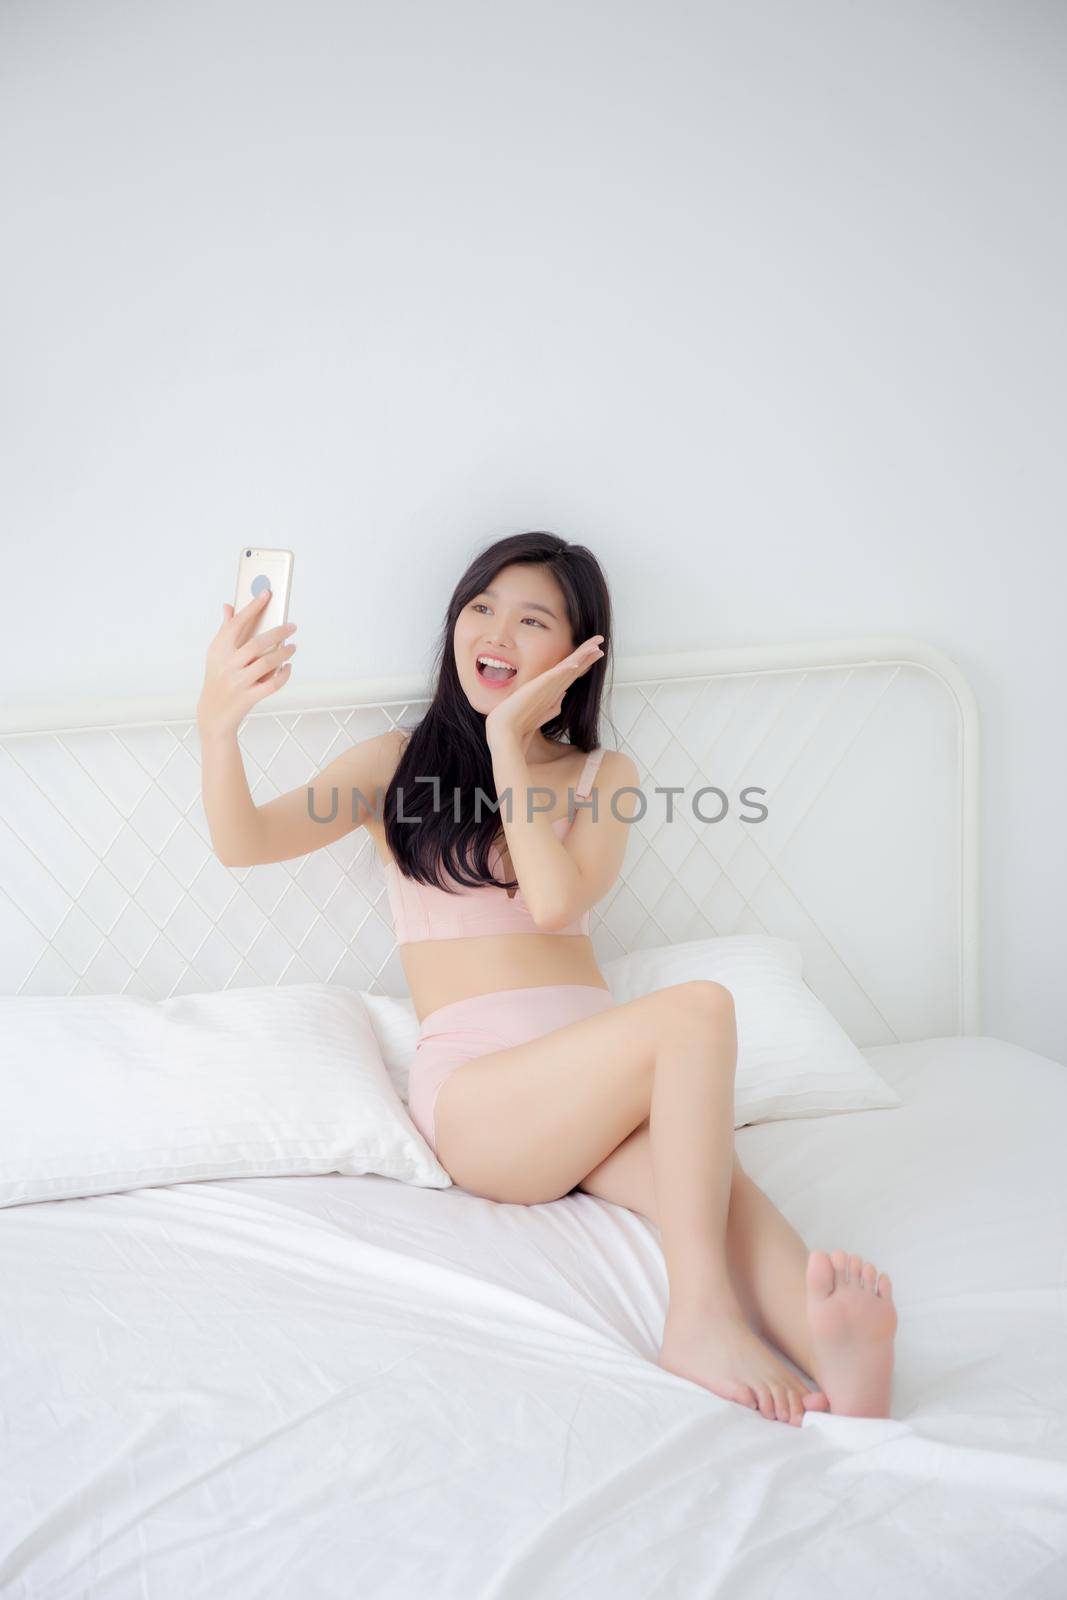 Beautiful young asian woman sexy in underwear talking a selfie on smartphone for social network in the bedroom, girl in lingerie relax with taking a picture on mobile phone on bed in the bedchamber.